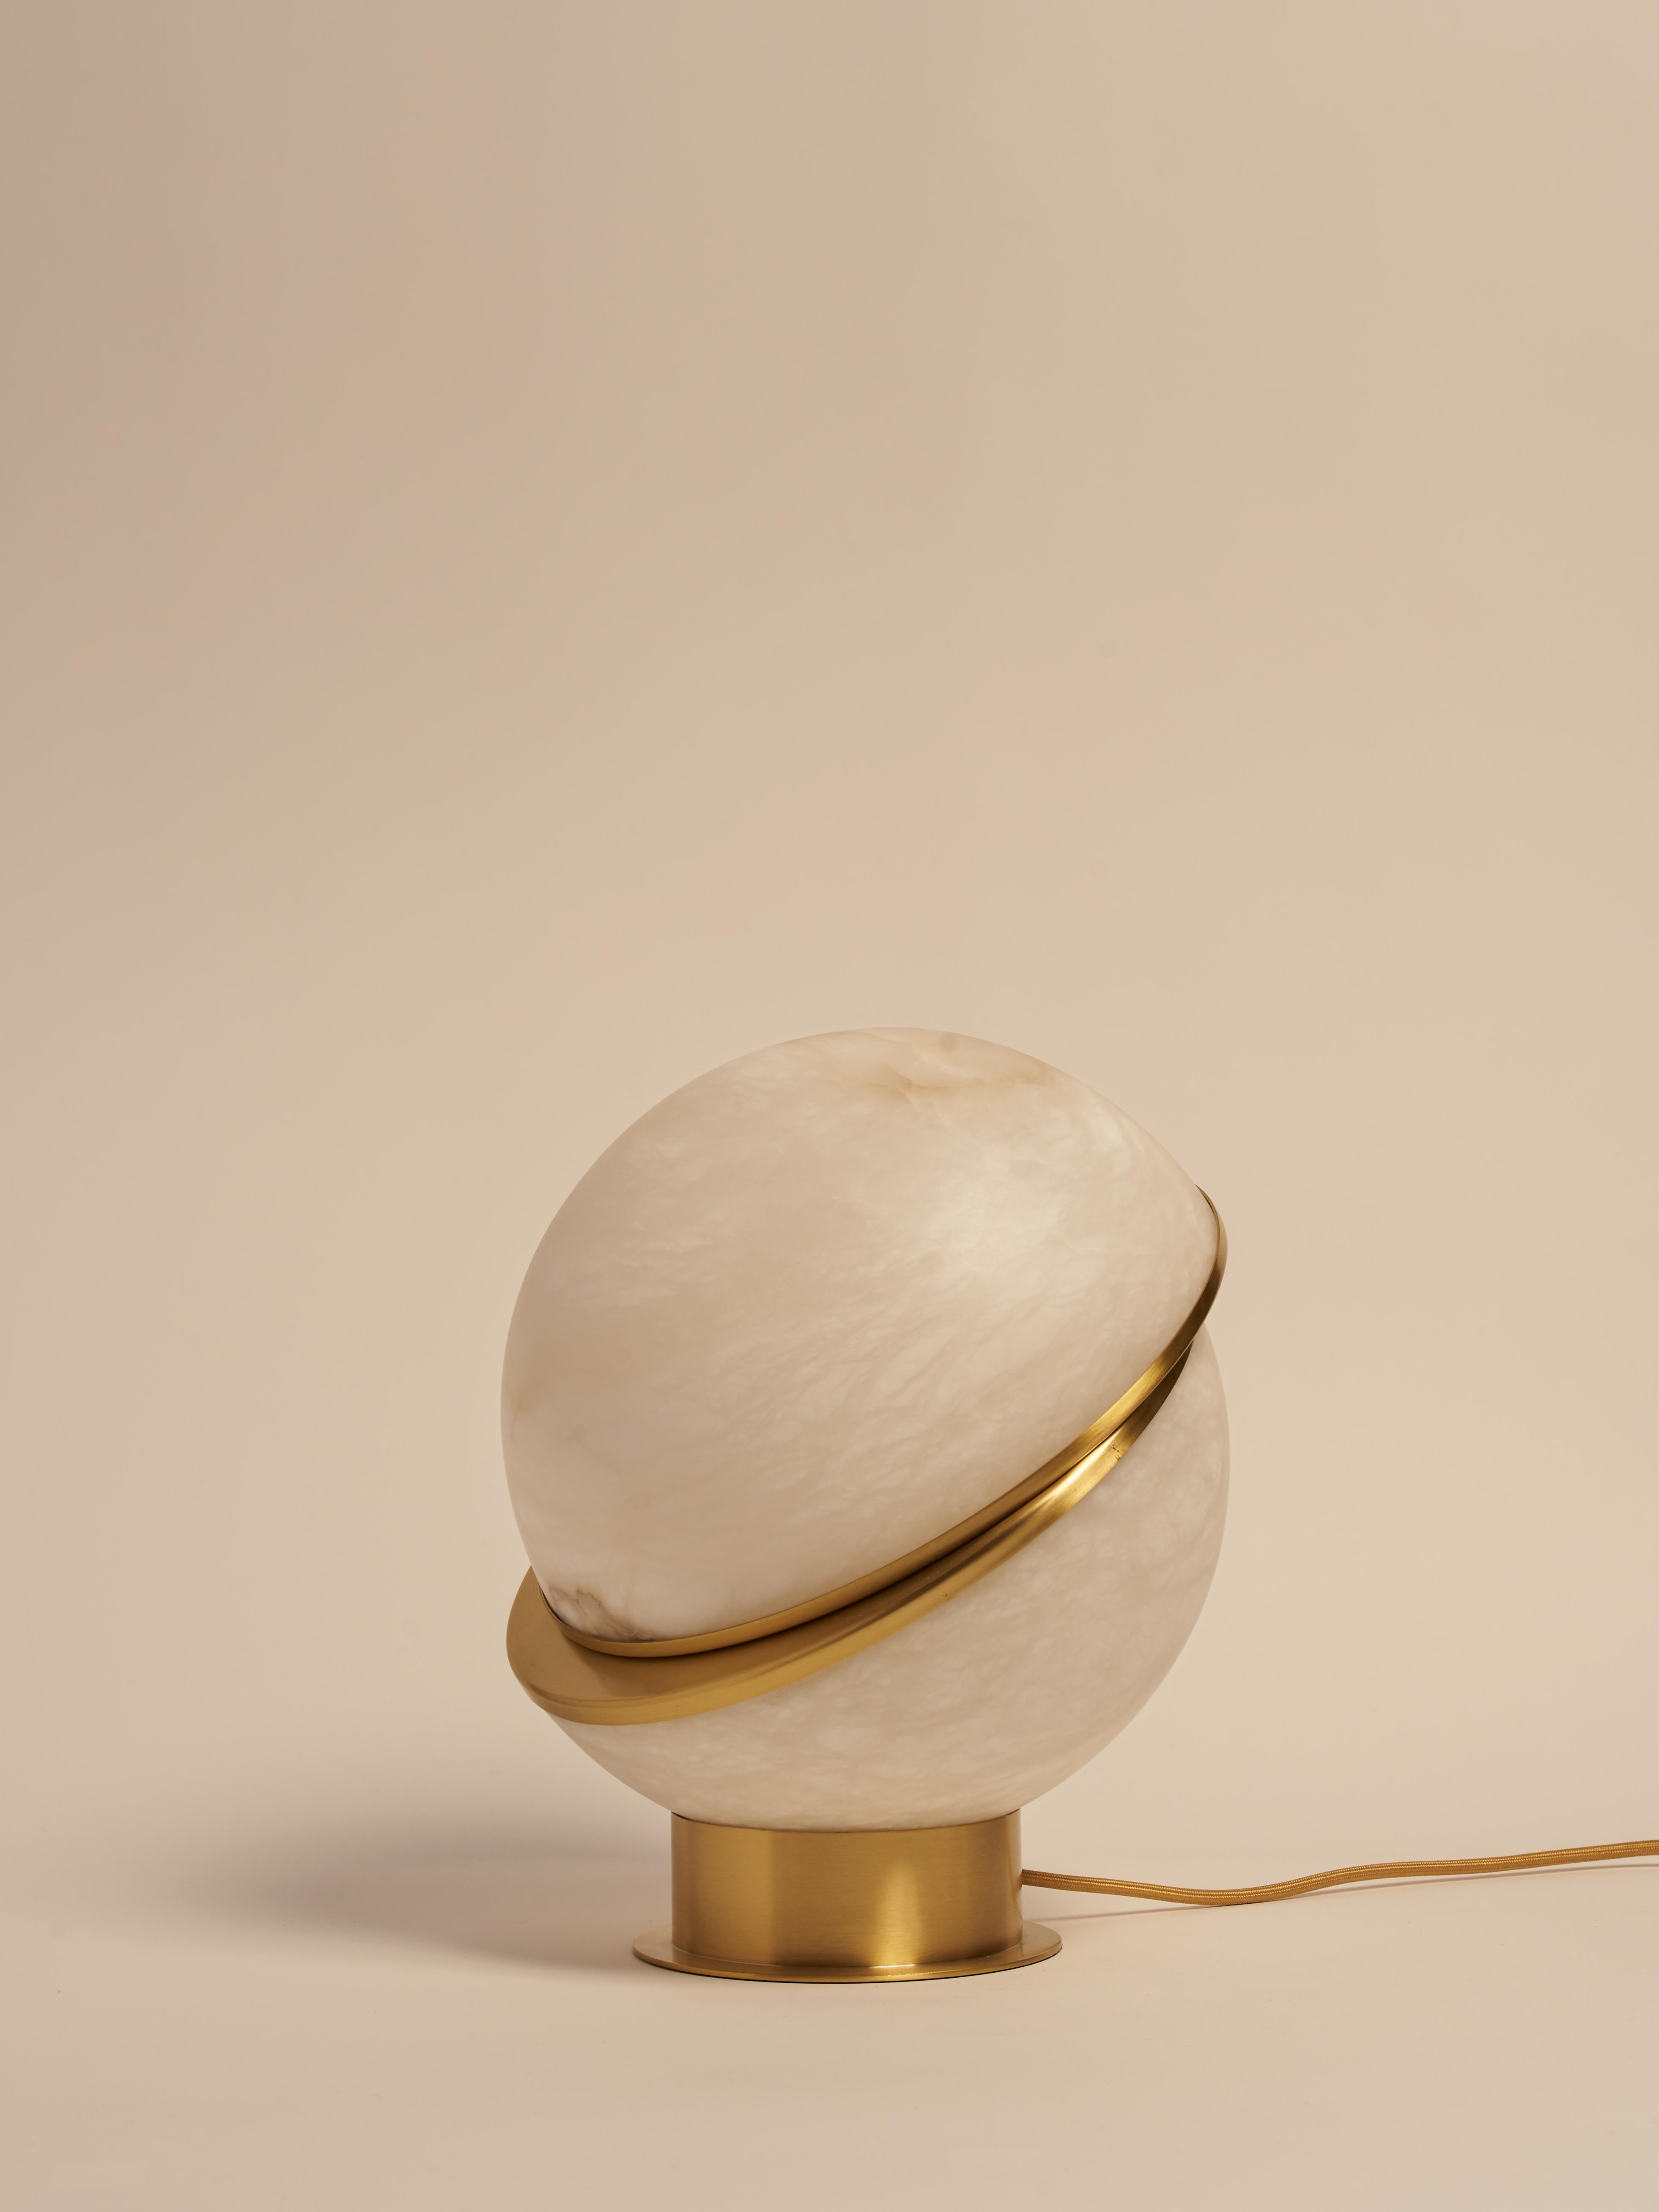 Contemporary Modern Italian Ethereal Allure of Alabaster - Offset Globe Lamp in satin brass For Sale